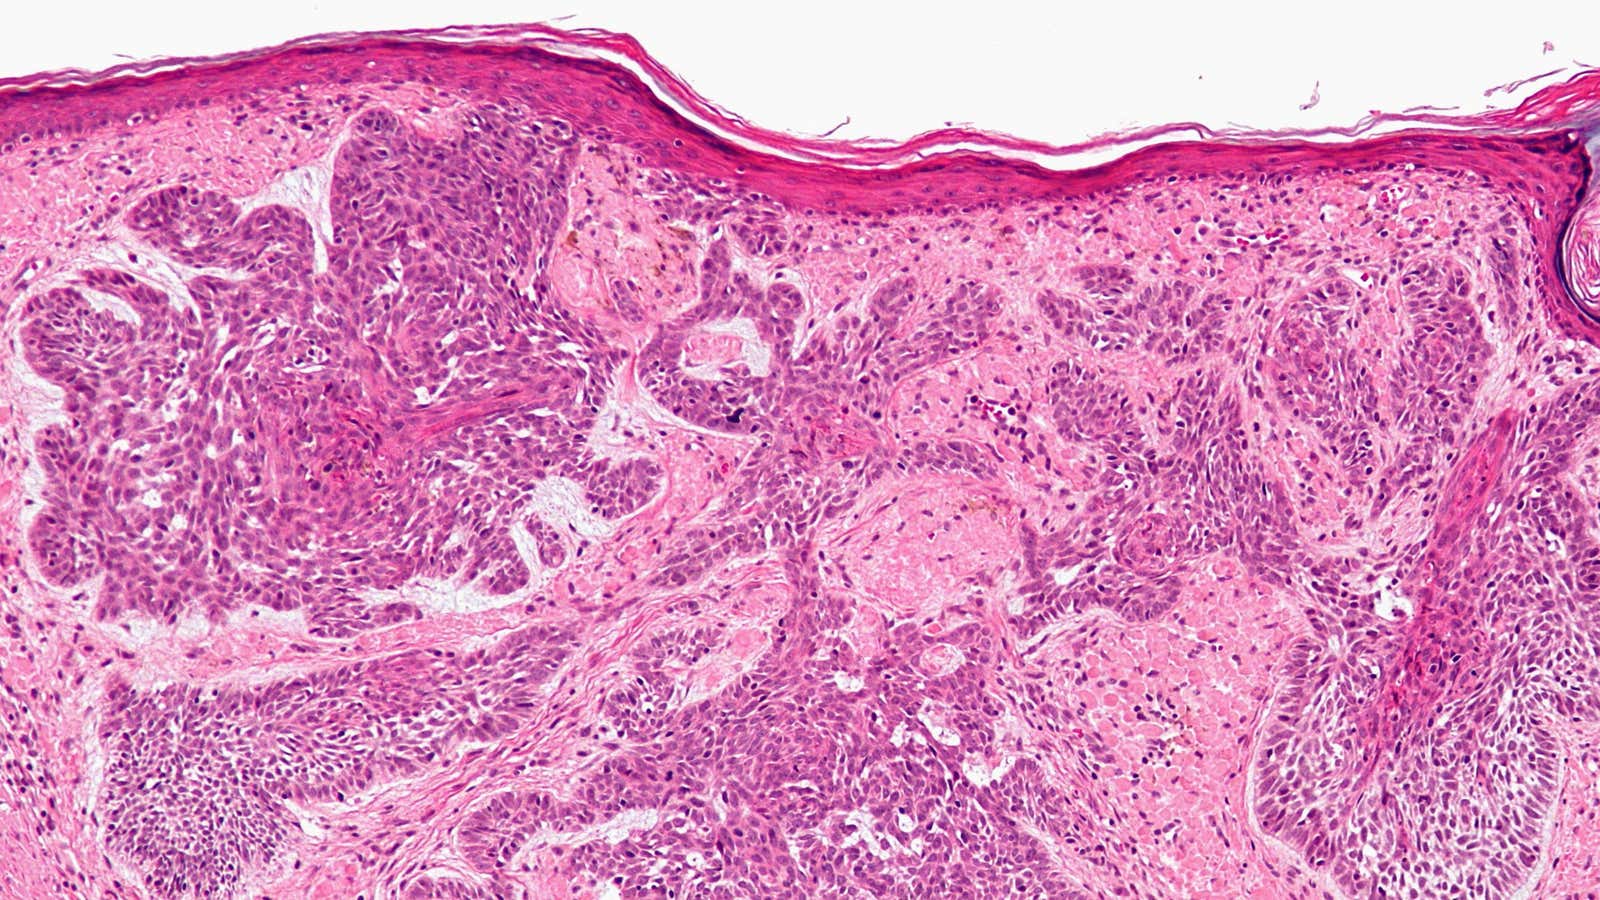 Basal cell carcinoma up close